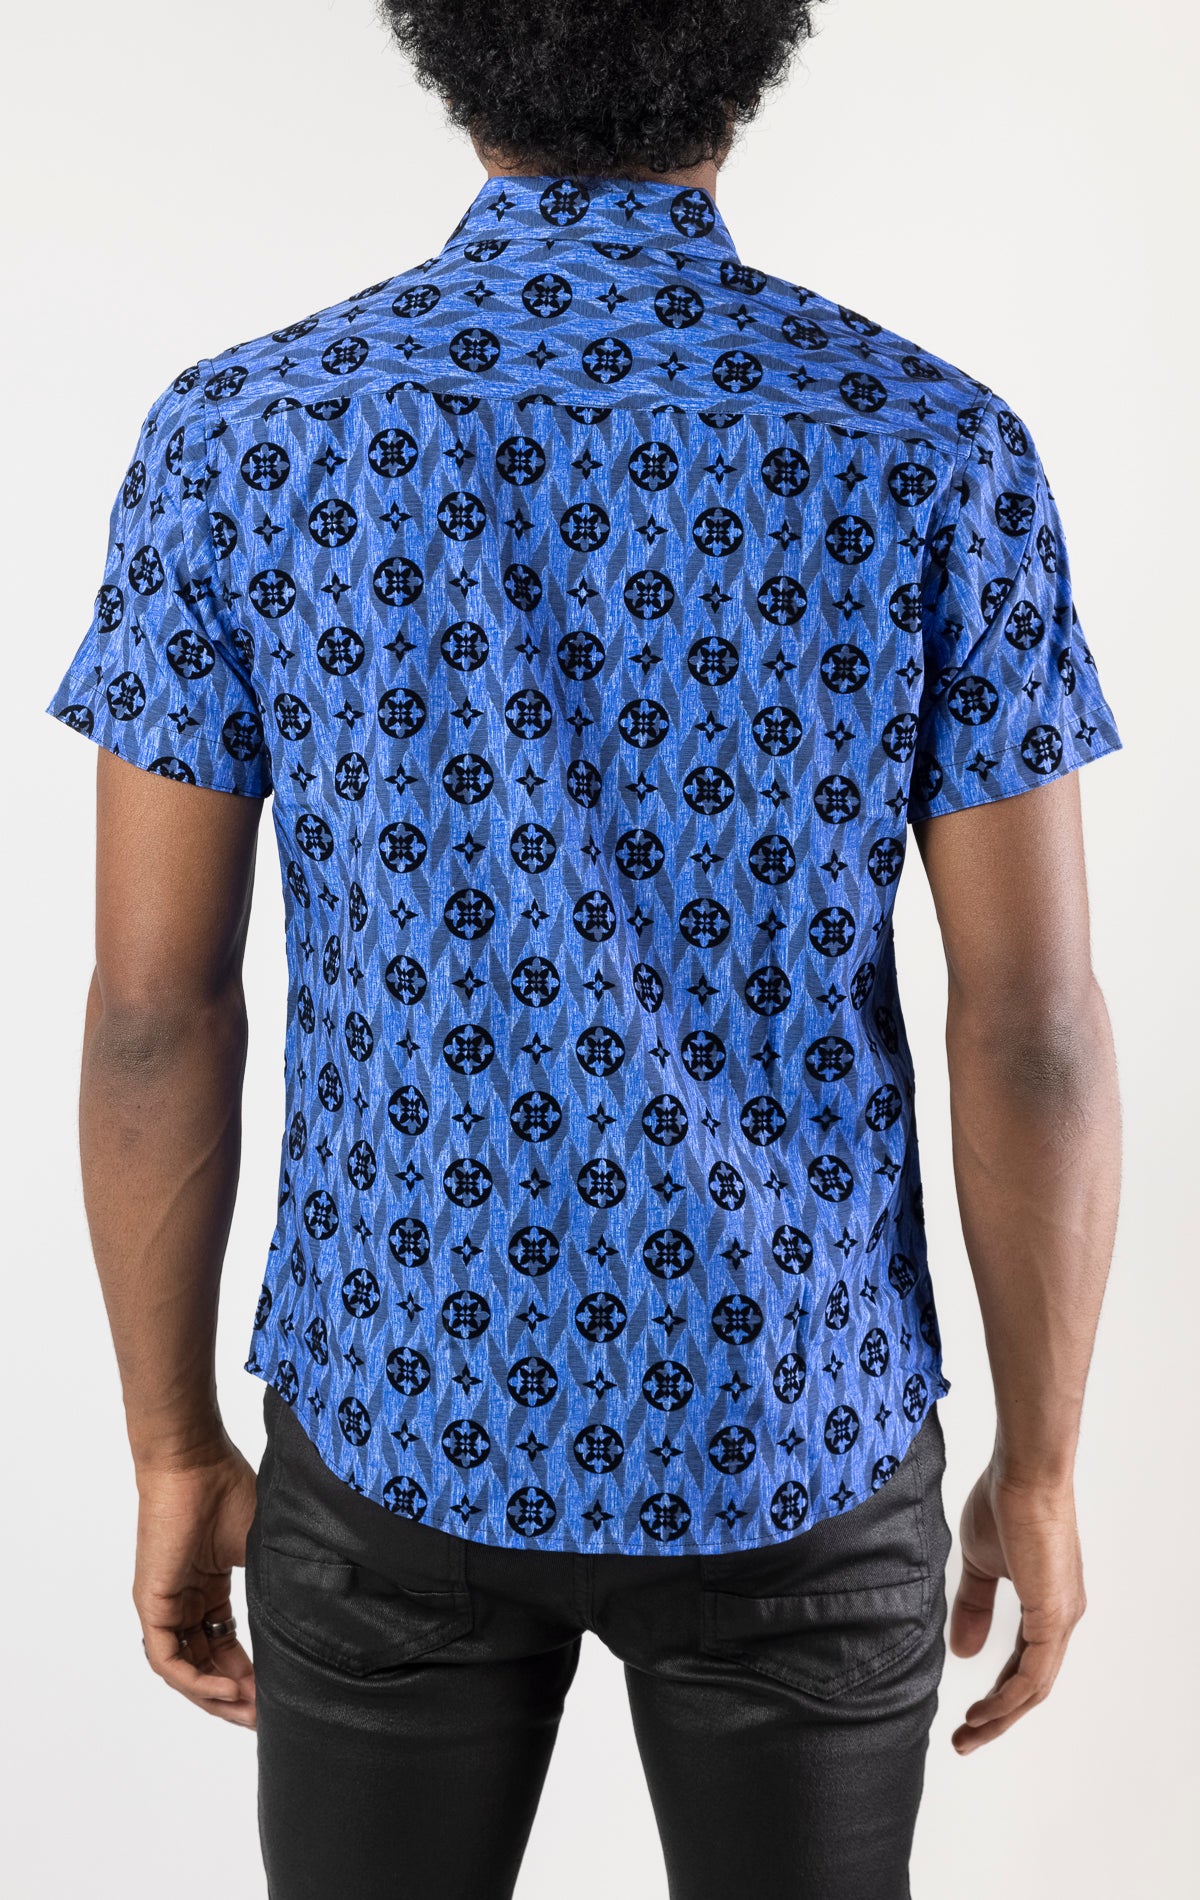 Blue Men's casual, relaxed-fit button-down shirt with a short sleeve design. The shirt features an all-over Greek key pattern and a front button closure.